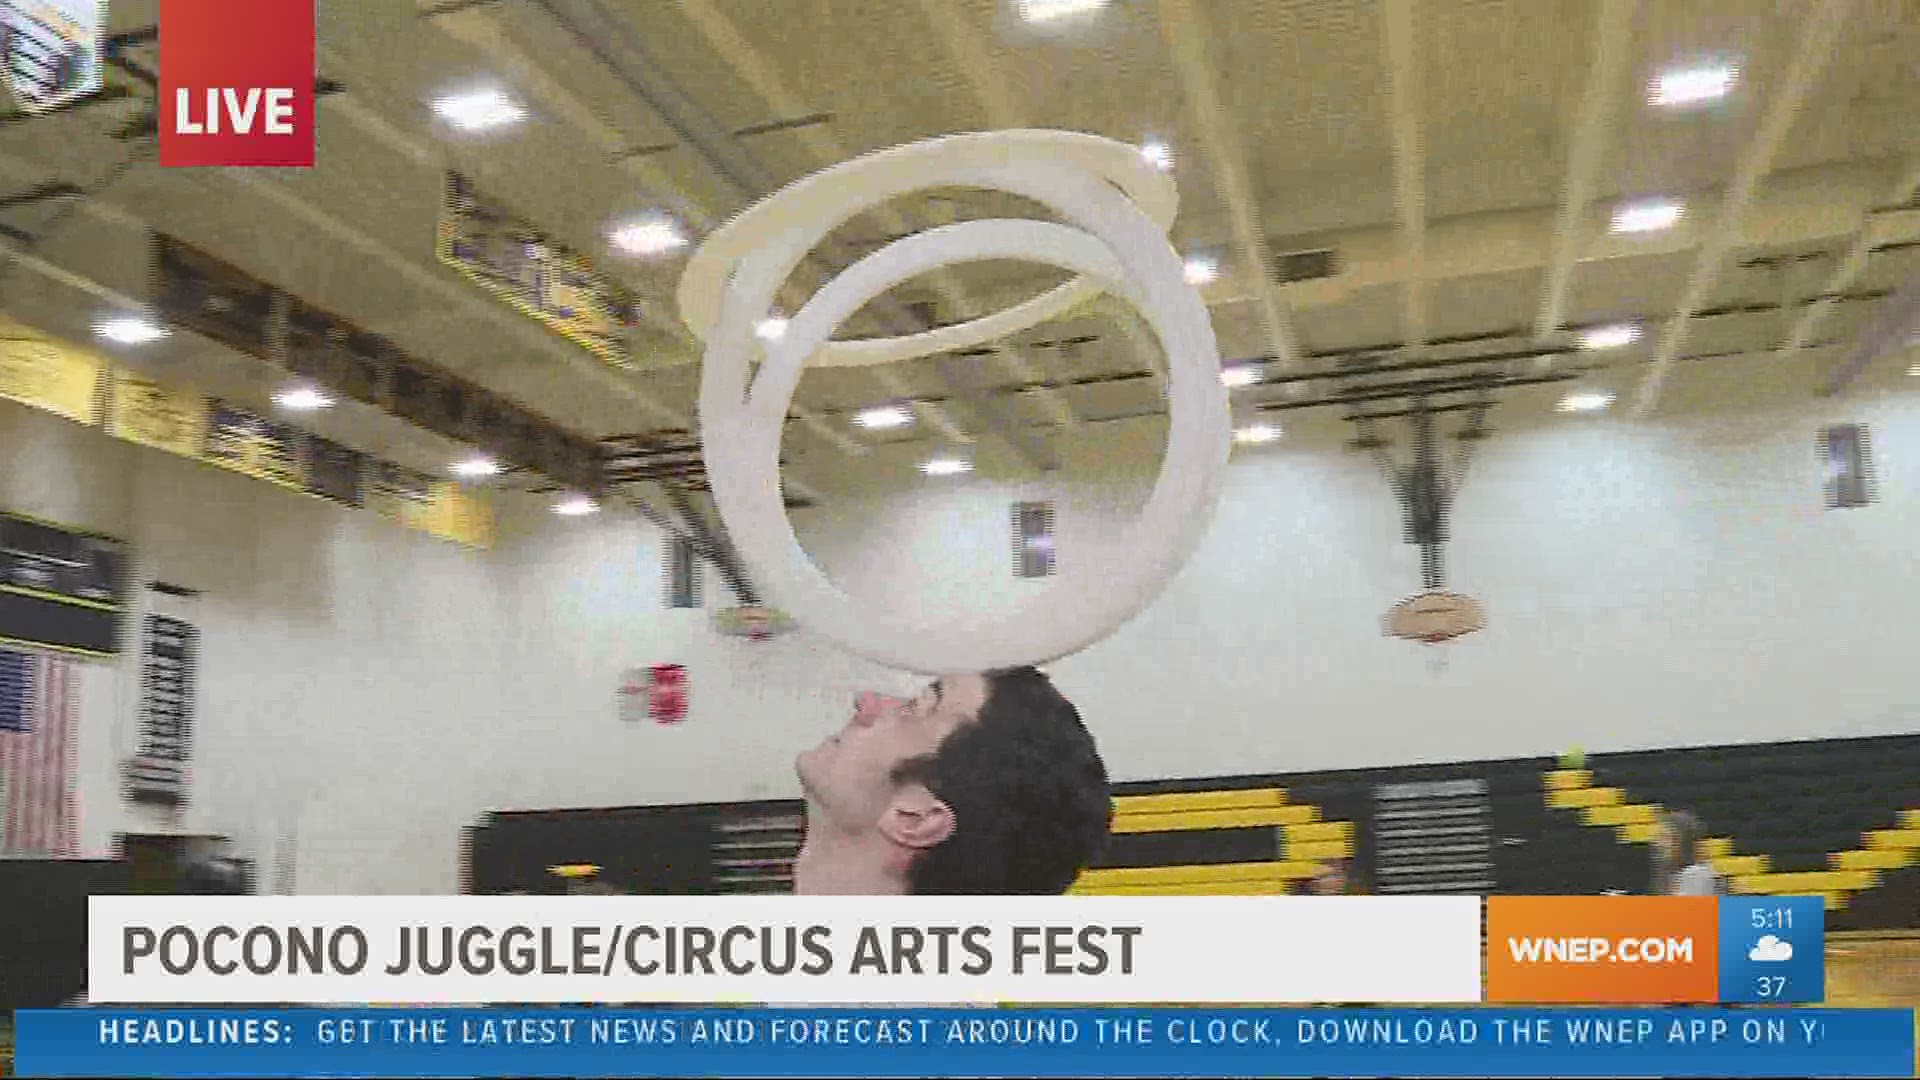 It's the three-day event where you can learn all sorts of circus tricks and tips.